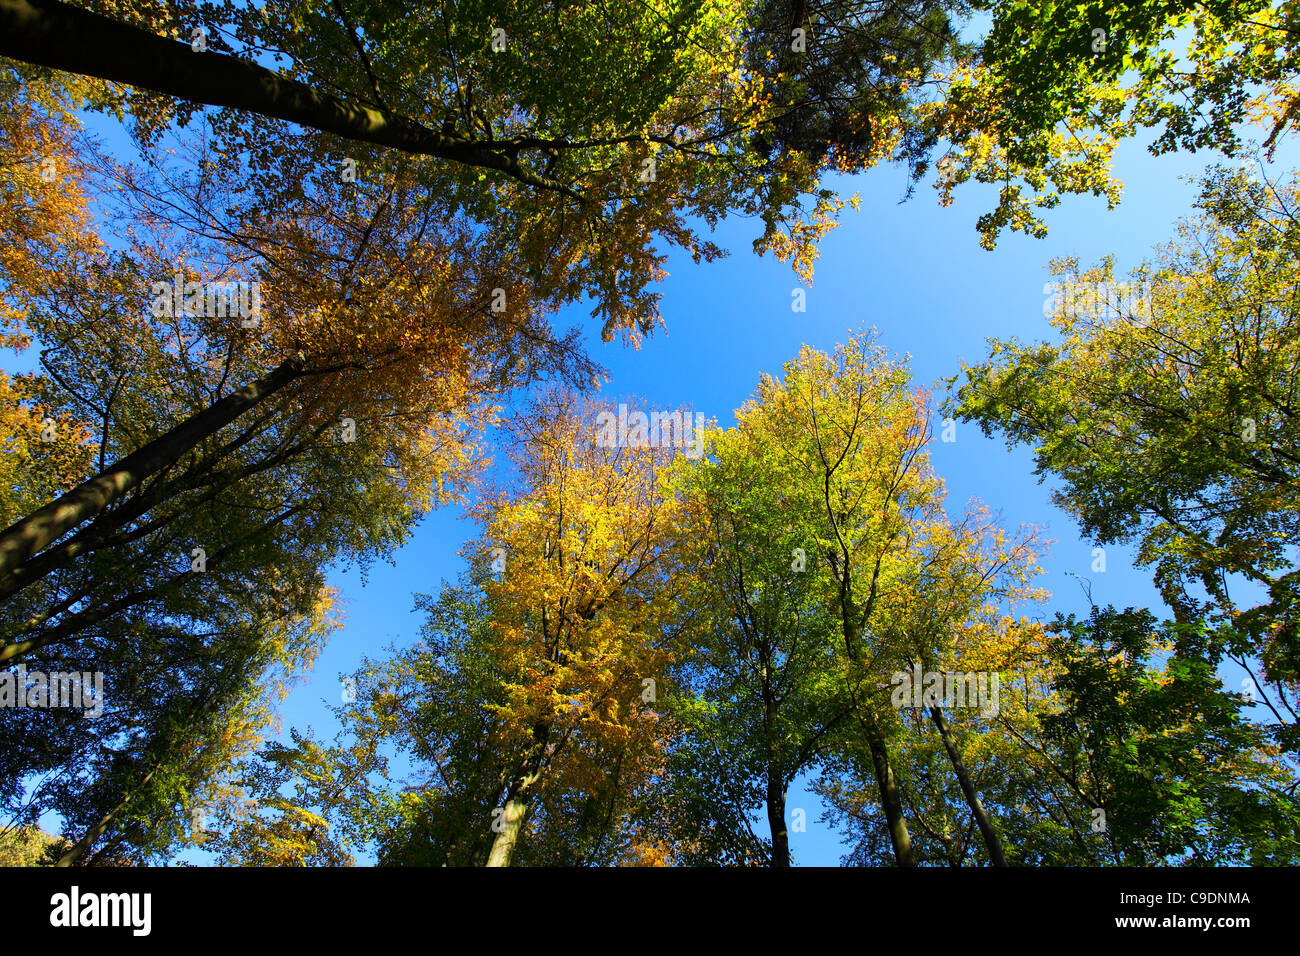 Forest, trees in fall, autumn, colored leaves. Landscape, near Essen, Germany. Stock Photo